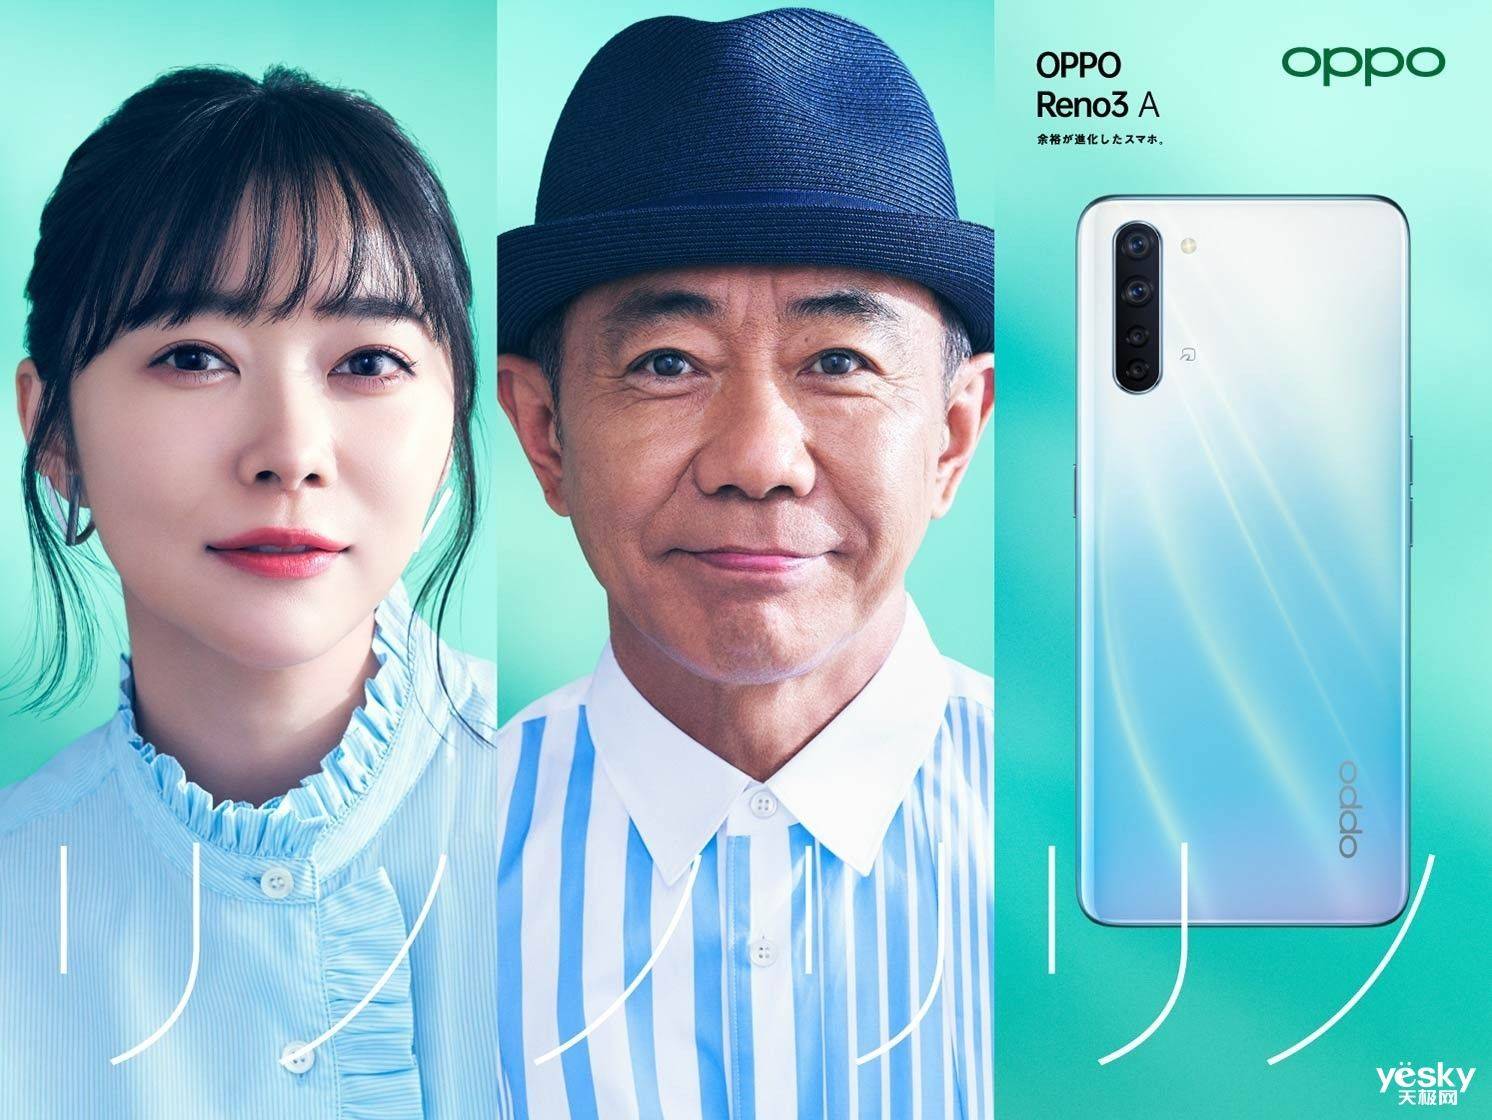 OPPO cooperates with Japanese operators KDDI and Softbank to bring 5G experience to more Japanese consumers